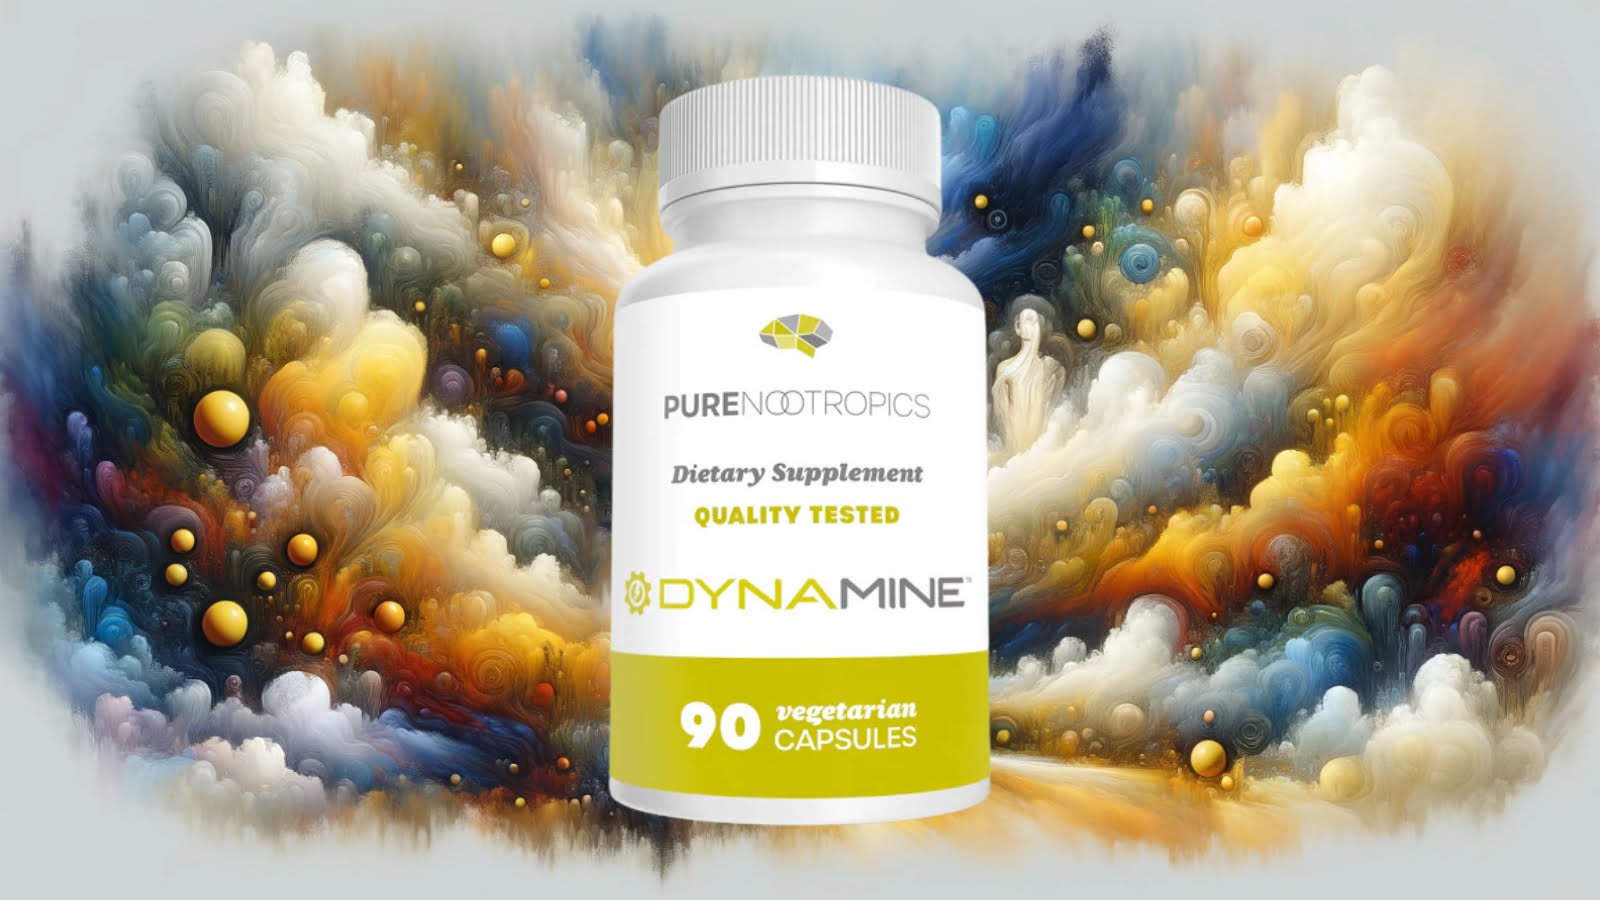 A review of Dynamine's nootropic benefits, uses, and side effects on neural health.